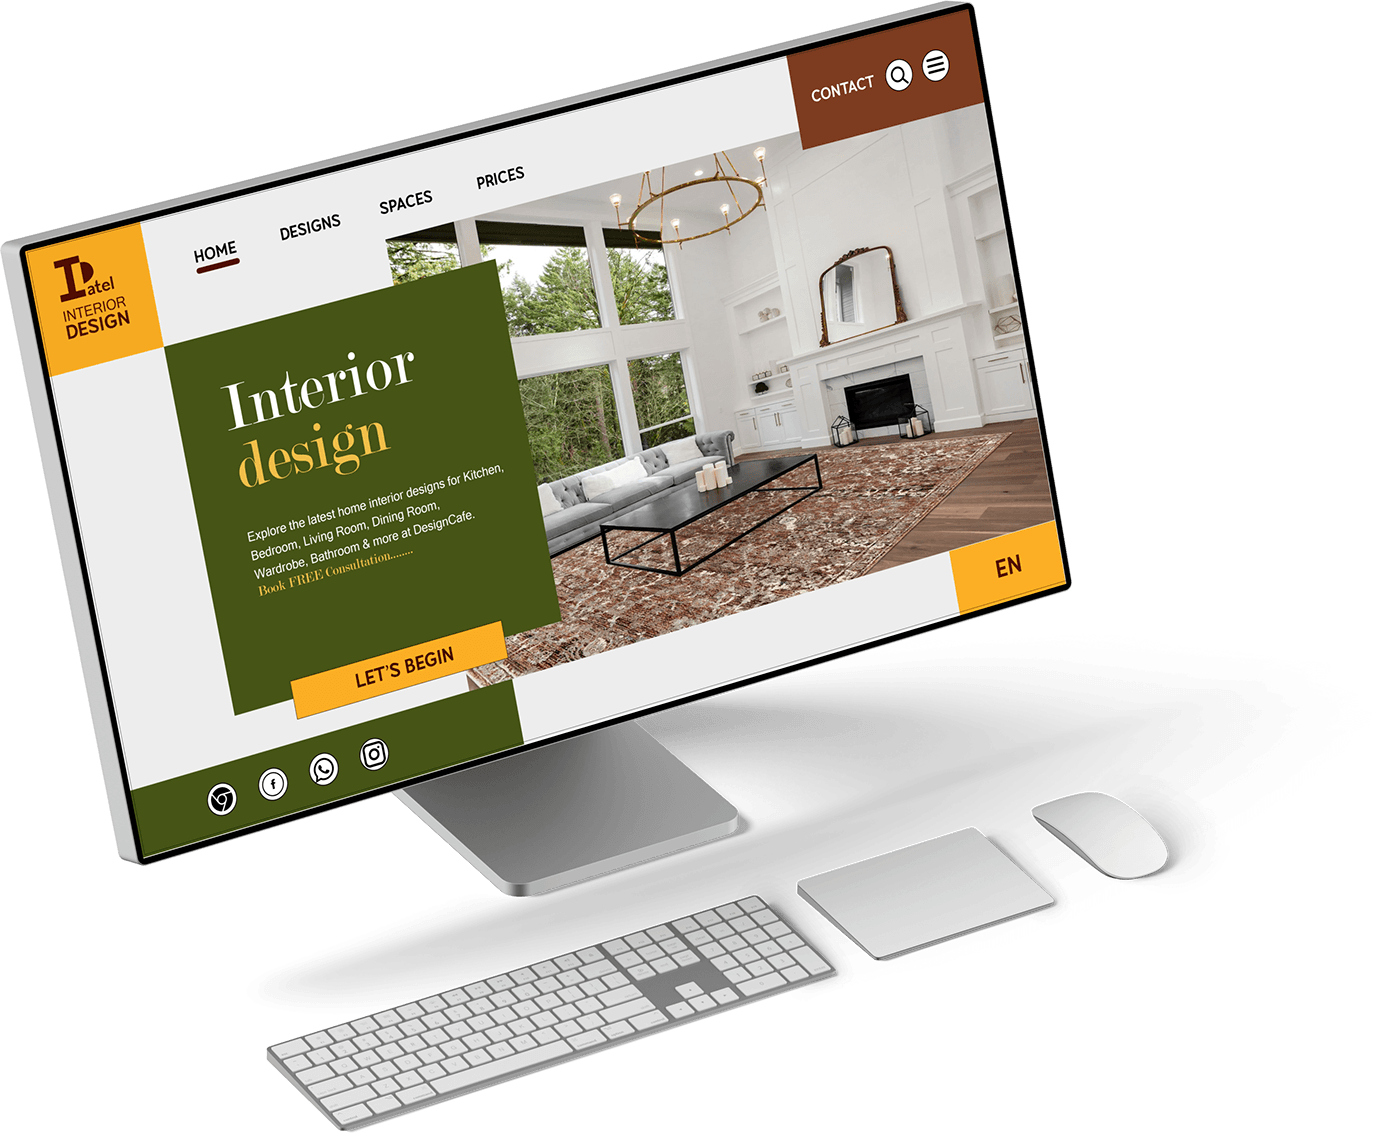 Landing page of Patel Interior Design for homes.